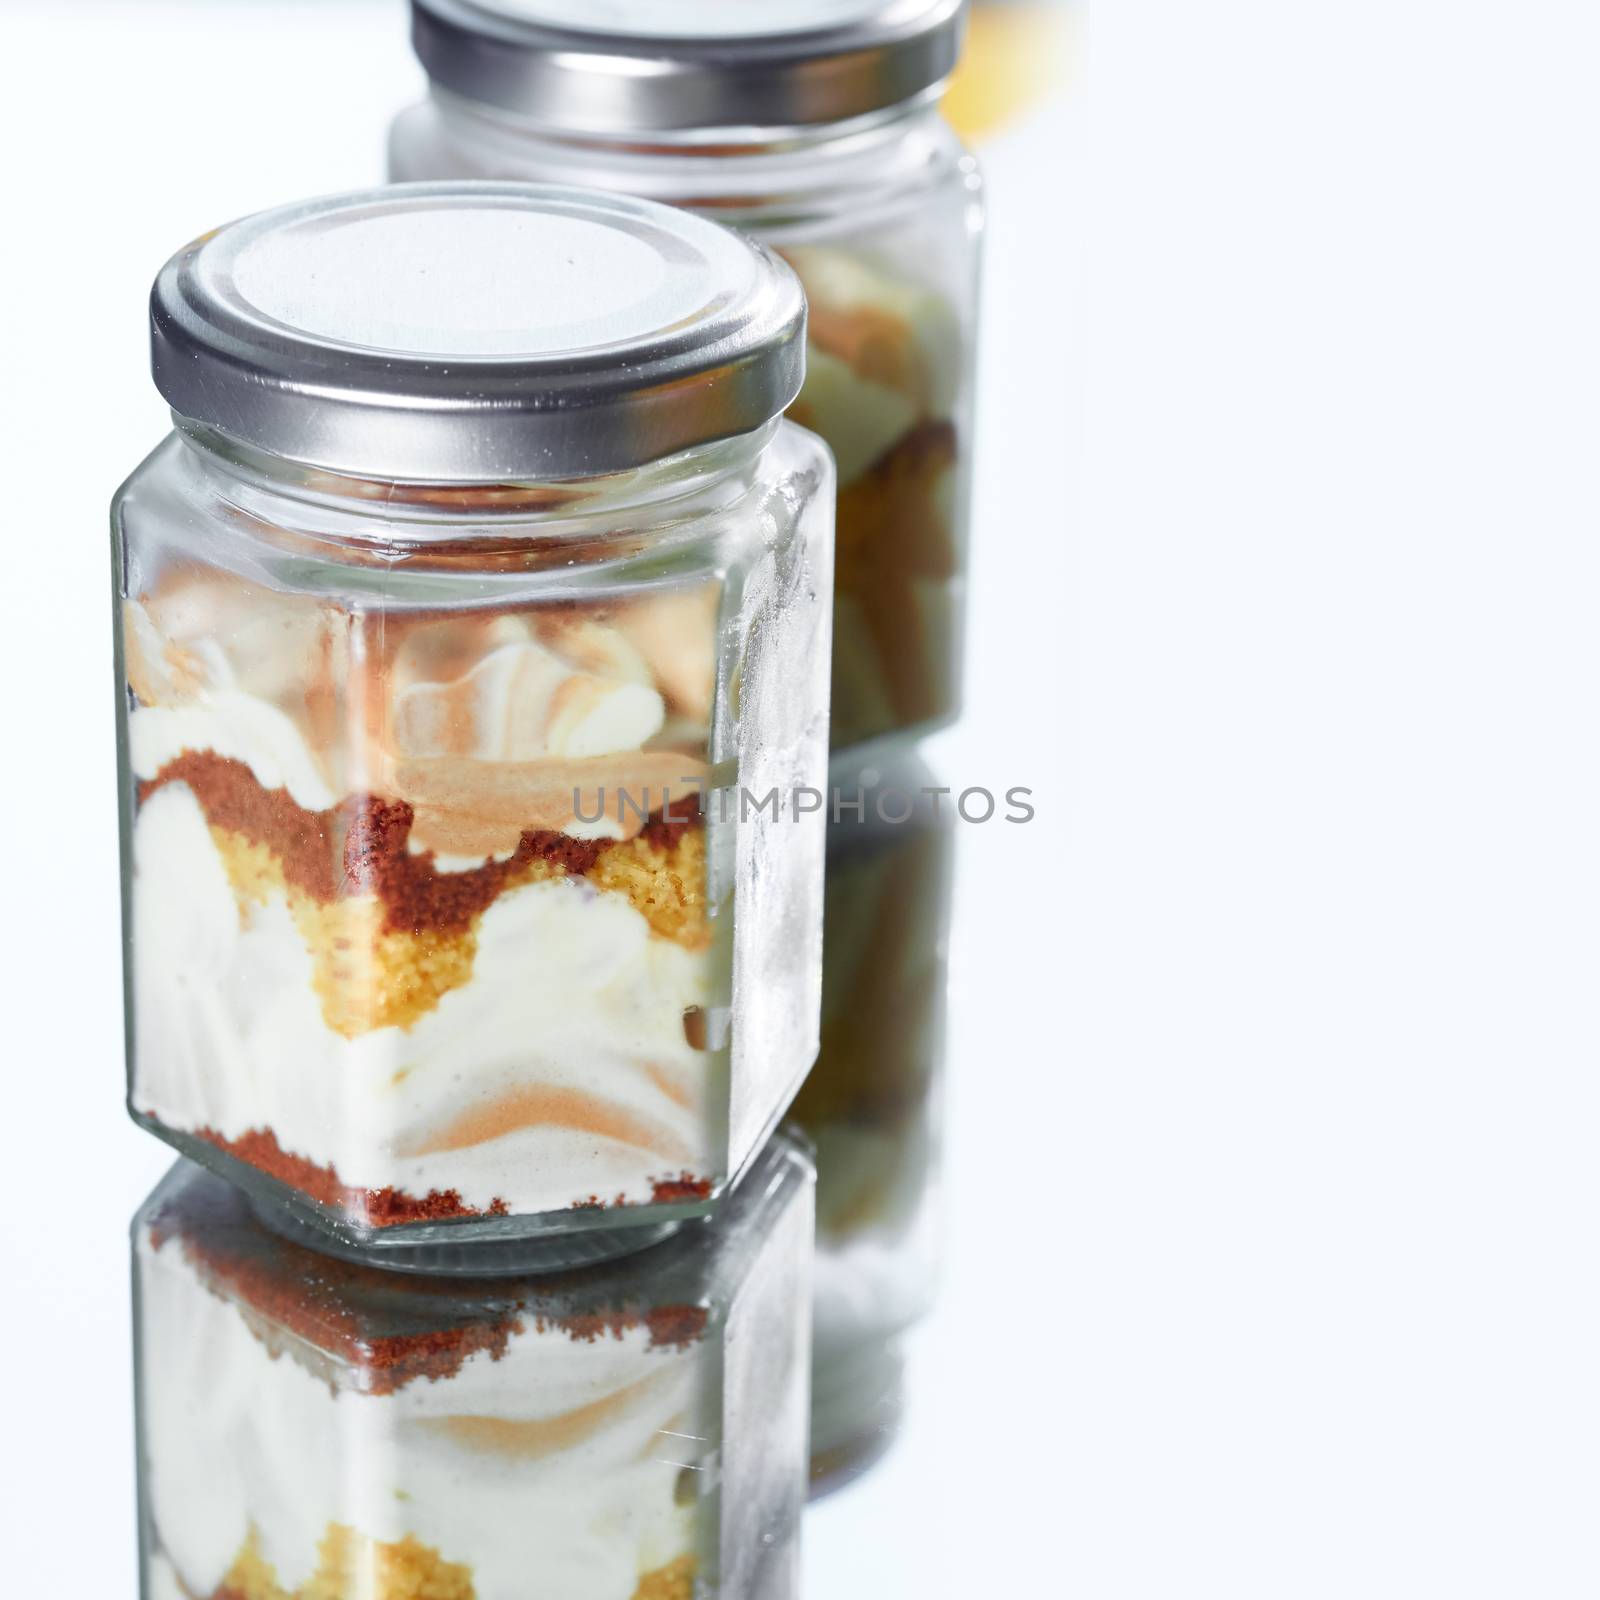 Cheesecake in a glass on a mirror with copy space